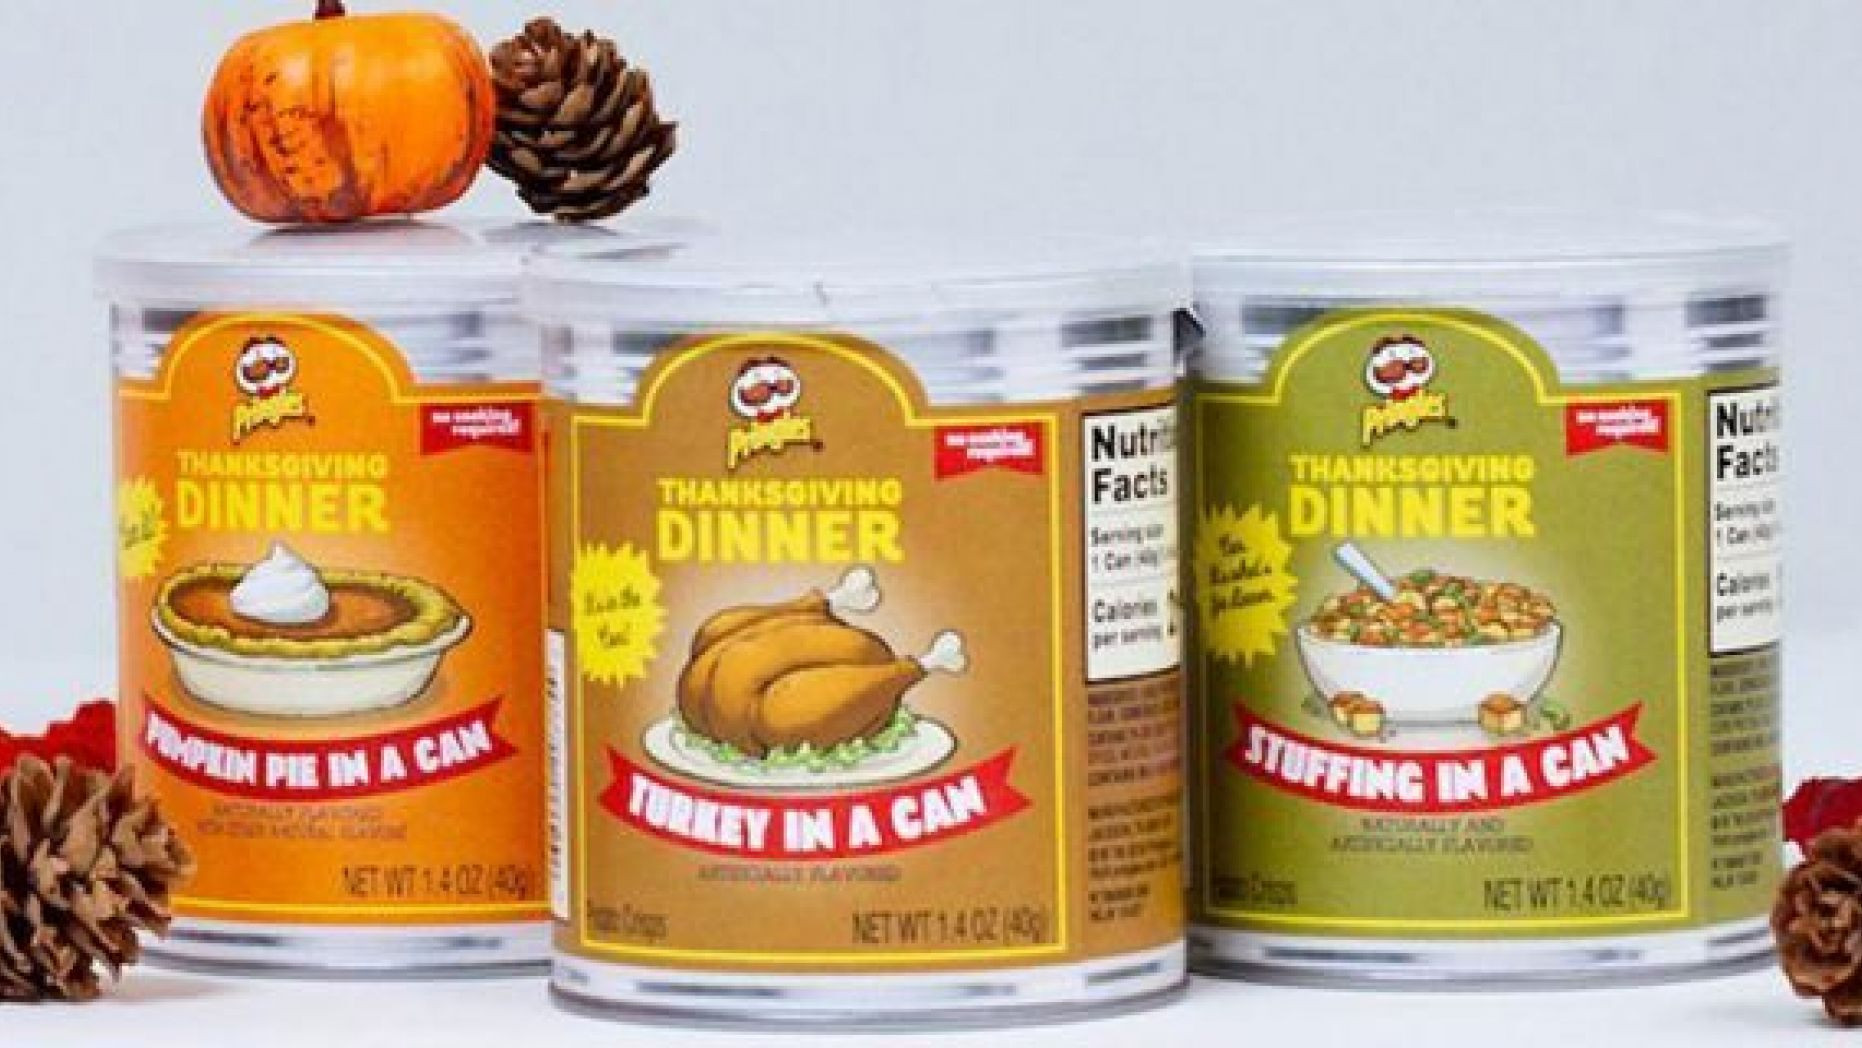 Thanksgiving Dinner Pringles
 Pringles selling Thanksgiving dinner in a can with latest